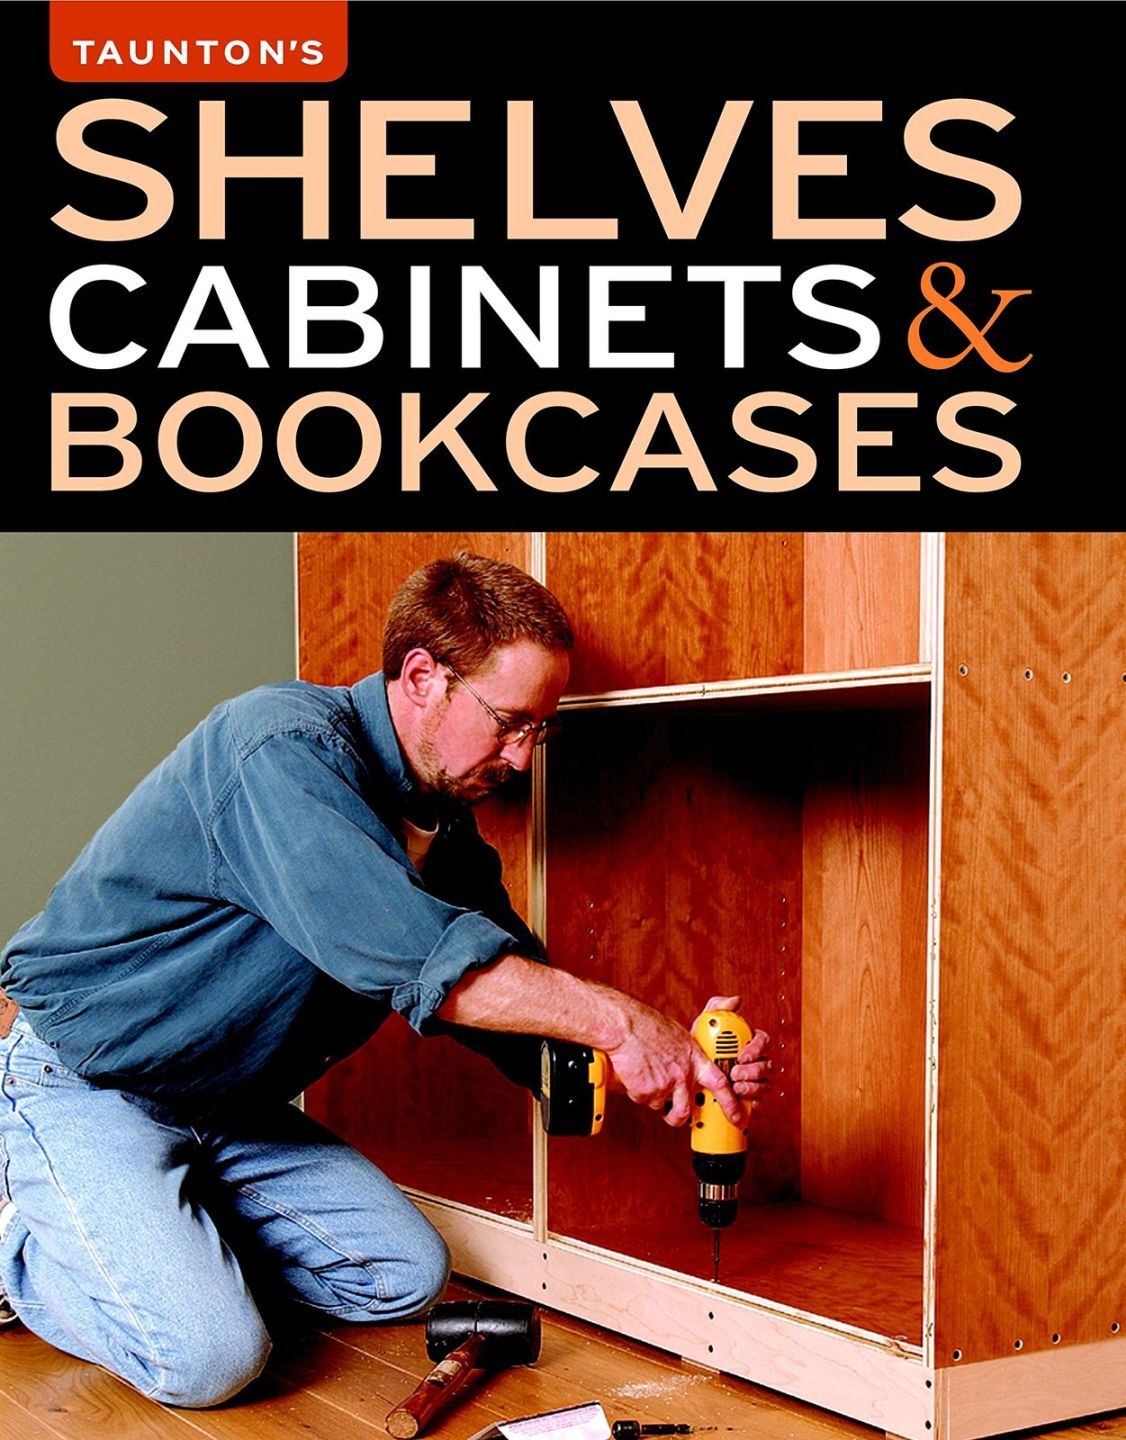 Shelves Cabinets & Bookcases